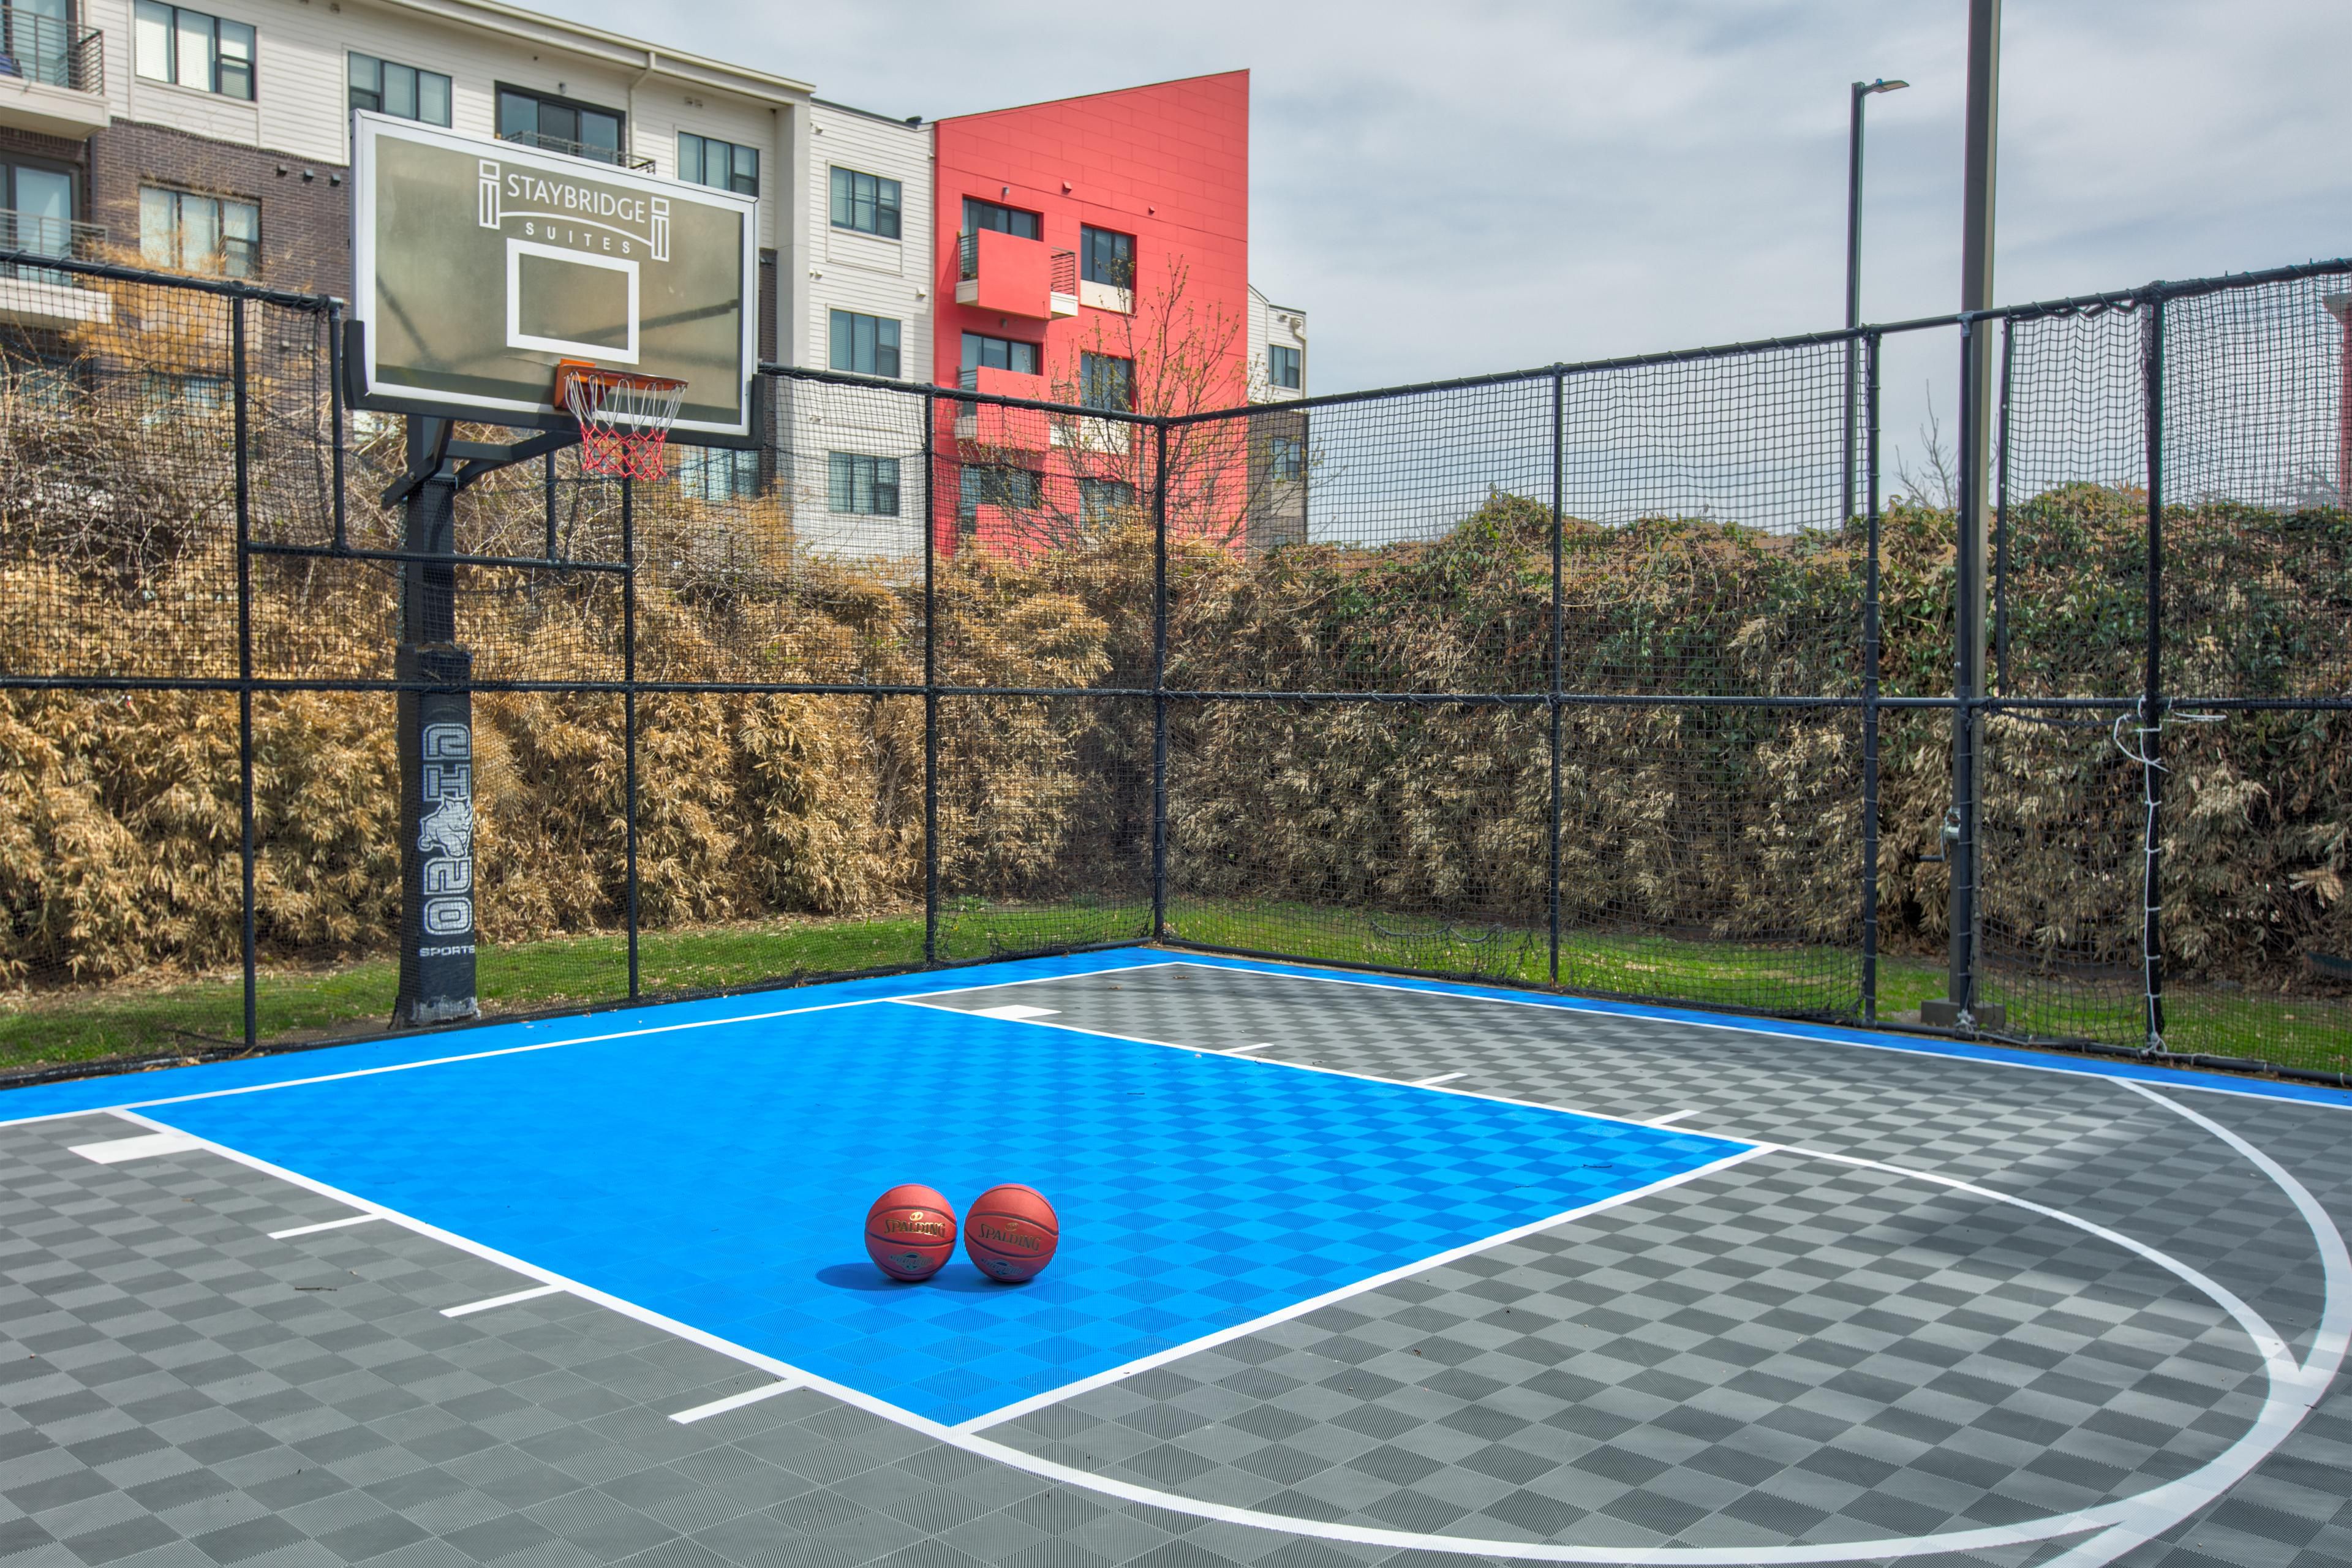 While staying with us, play a game of horse with the family or practice your best NBA moves on our on-site basketball court. Didn't bring a basketball? We got you covered. We provide a basketball for check-out. See the front desk for assistance.